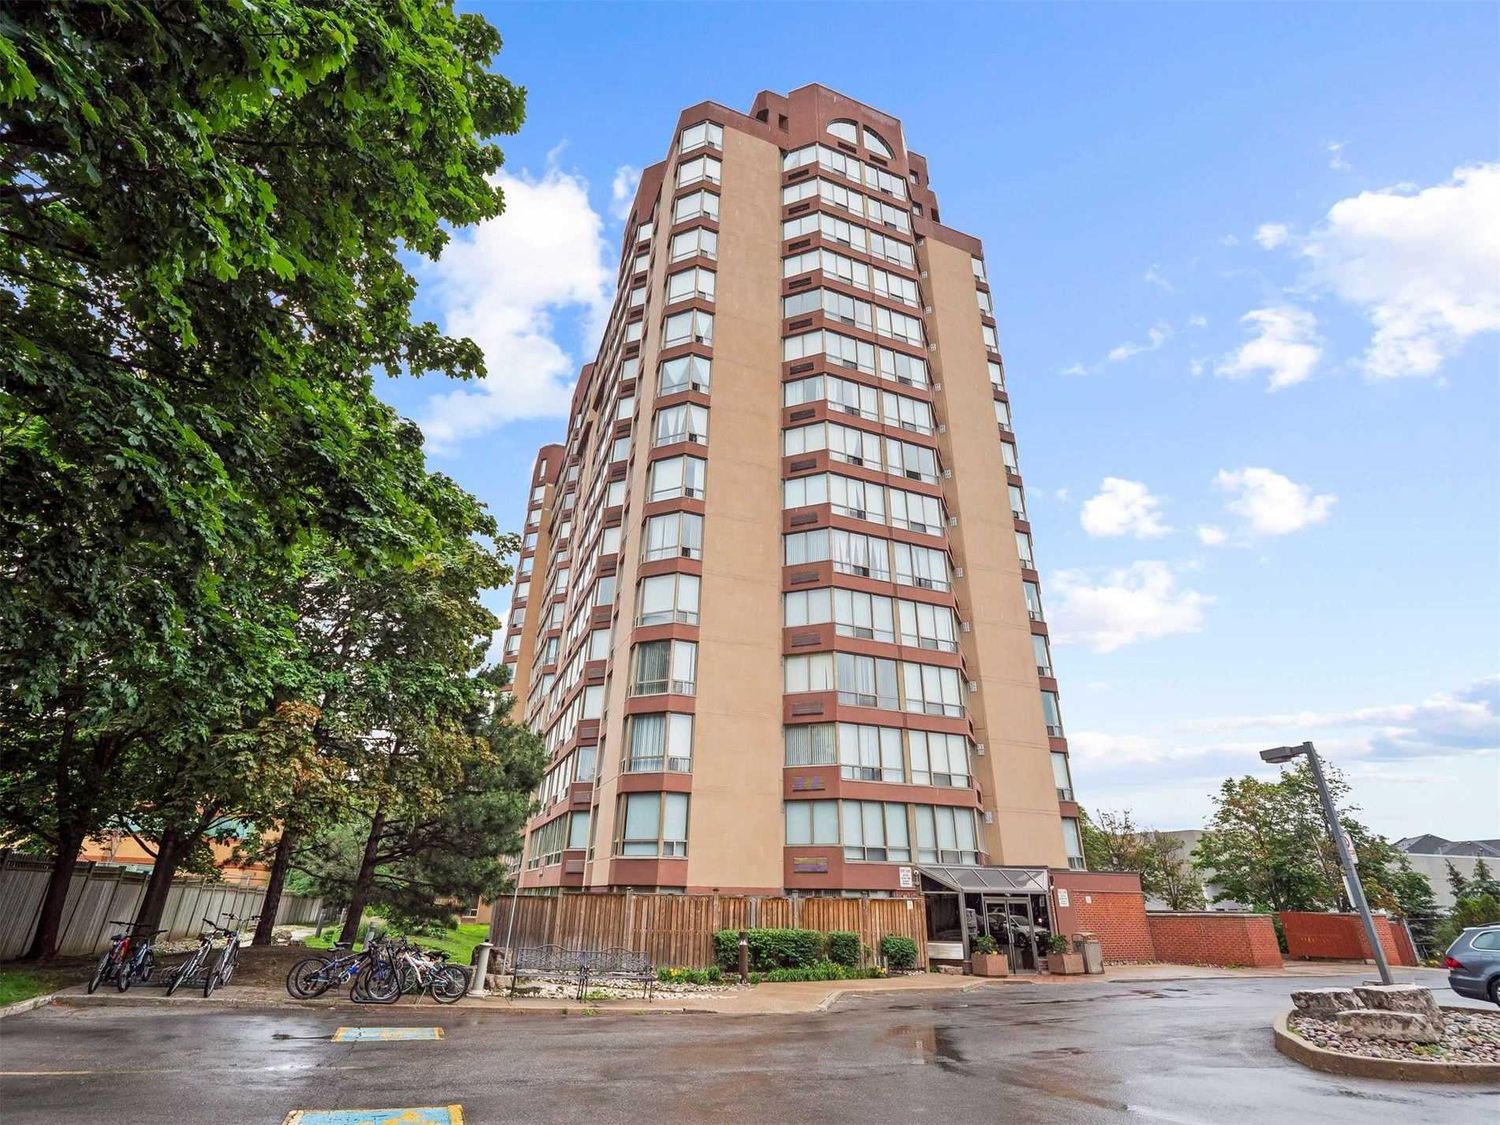 25 Fairview Road W. The Fairmont Condos is located in  Mississauga, Toronto - image #1 of 2